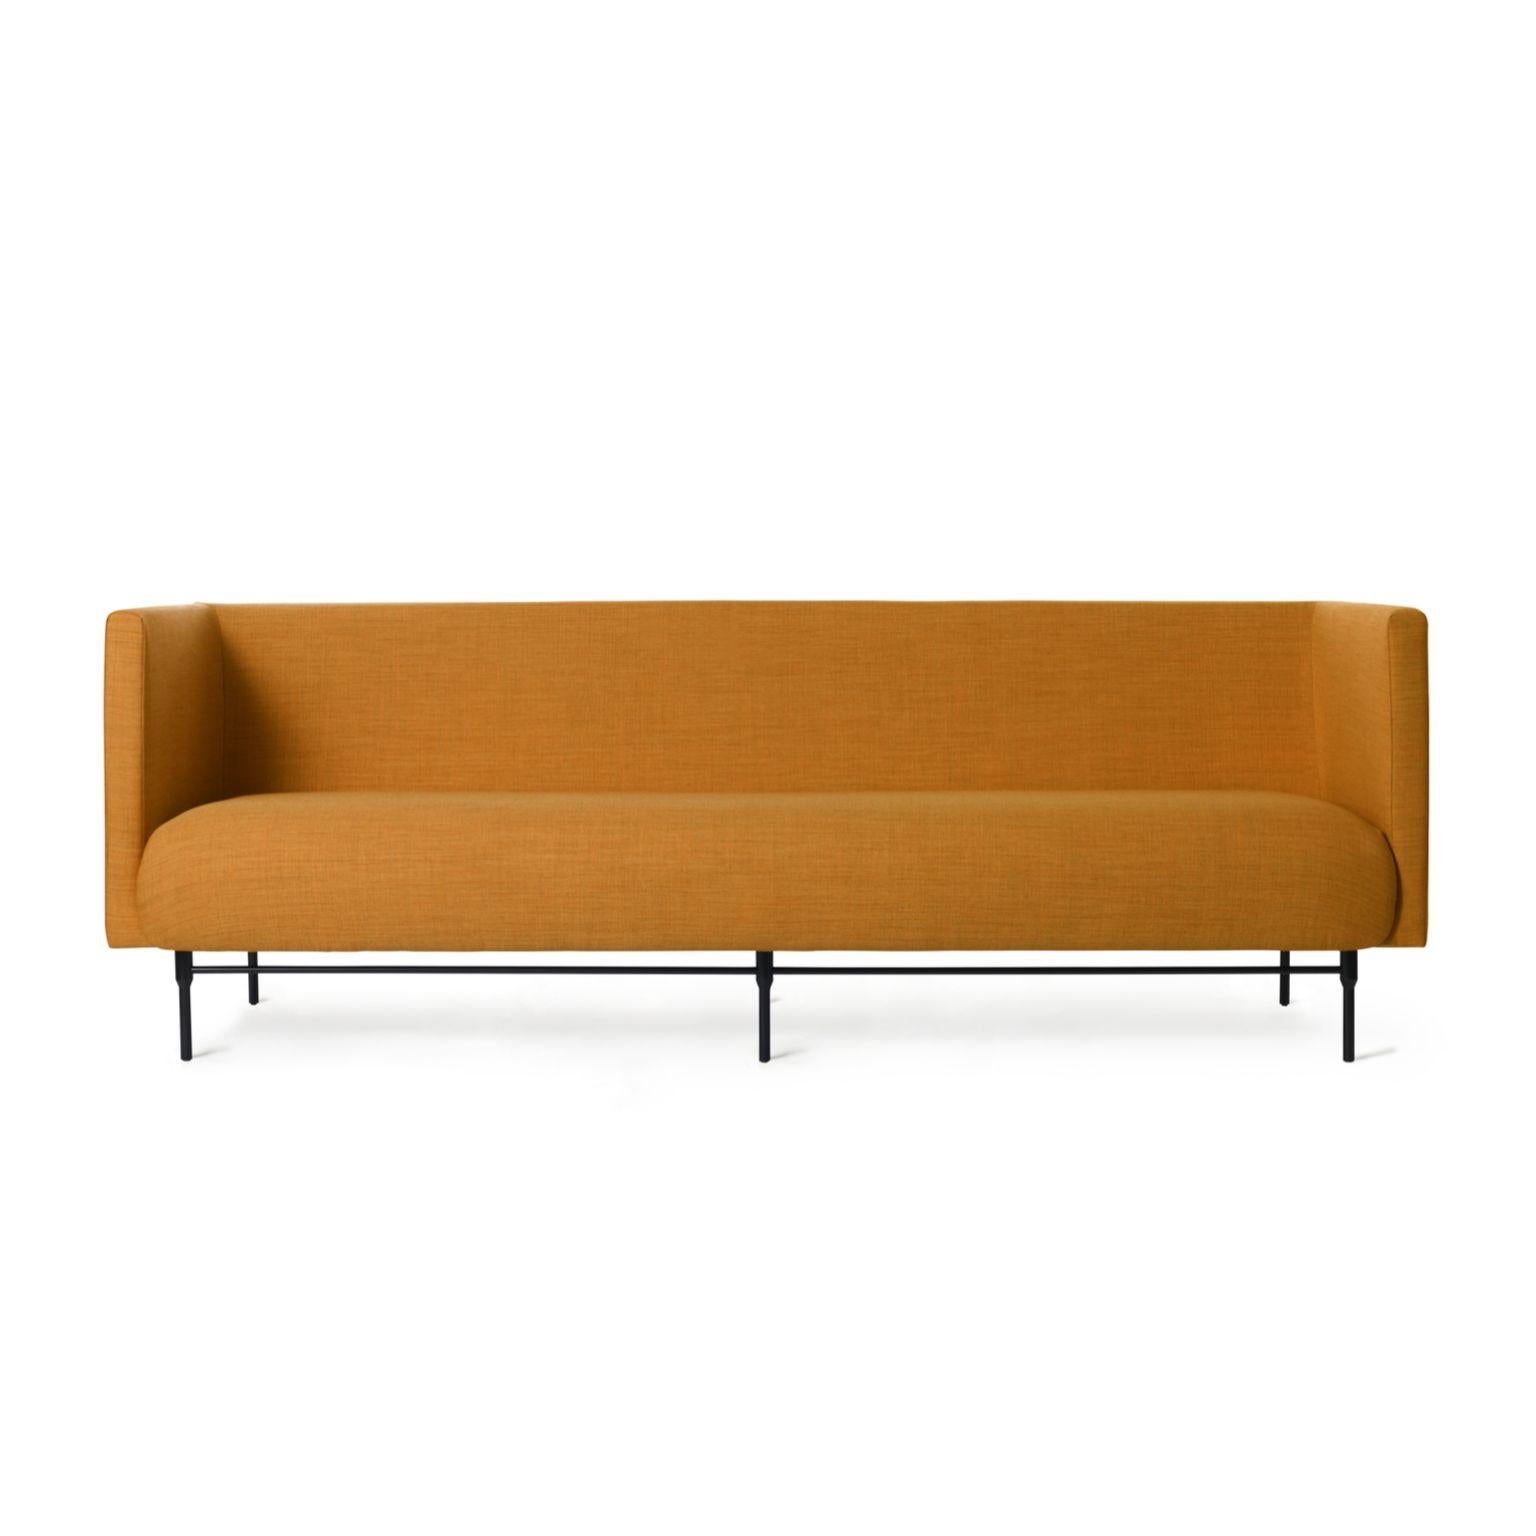 Galore 3 seater dark Ochre by Warm Nordic
Dimensions: D 222 x W 83 x H 76 cm
Material: Textile upholstery, Powder coated black steel legs, Wooden frame, foam, spring system.
Weight: 62 kg
Also available in different colours and finishes.

Warm